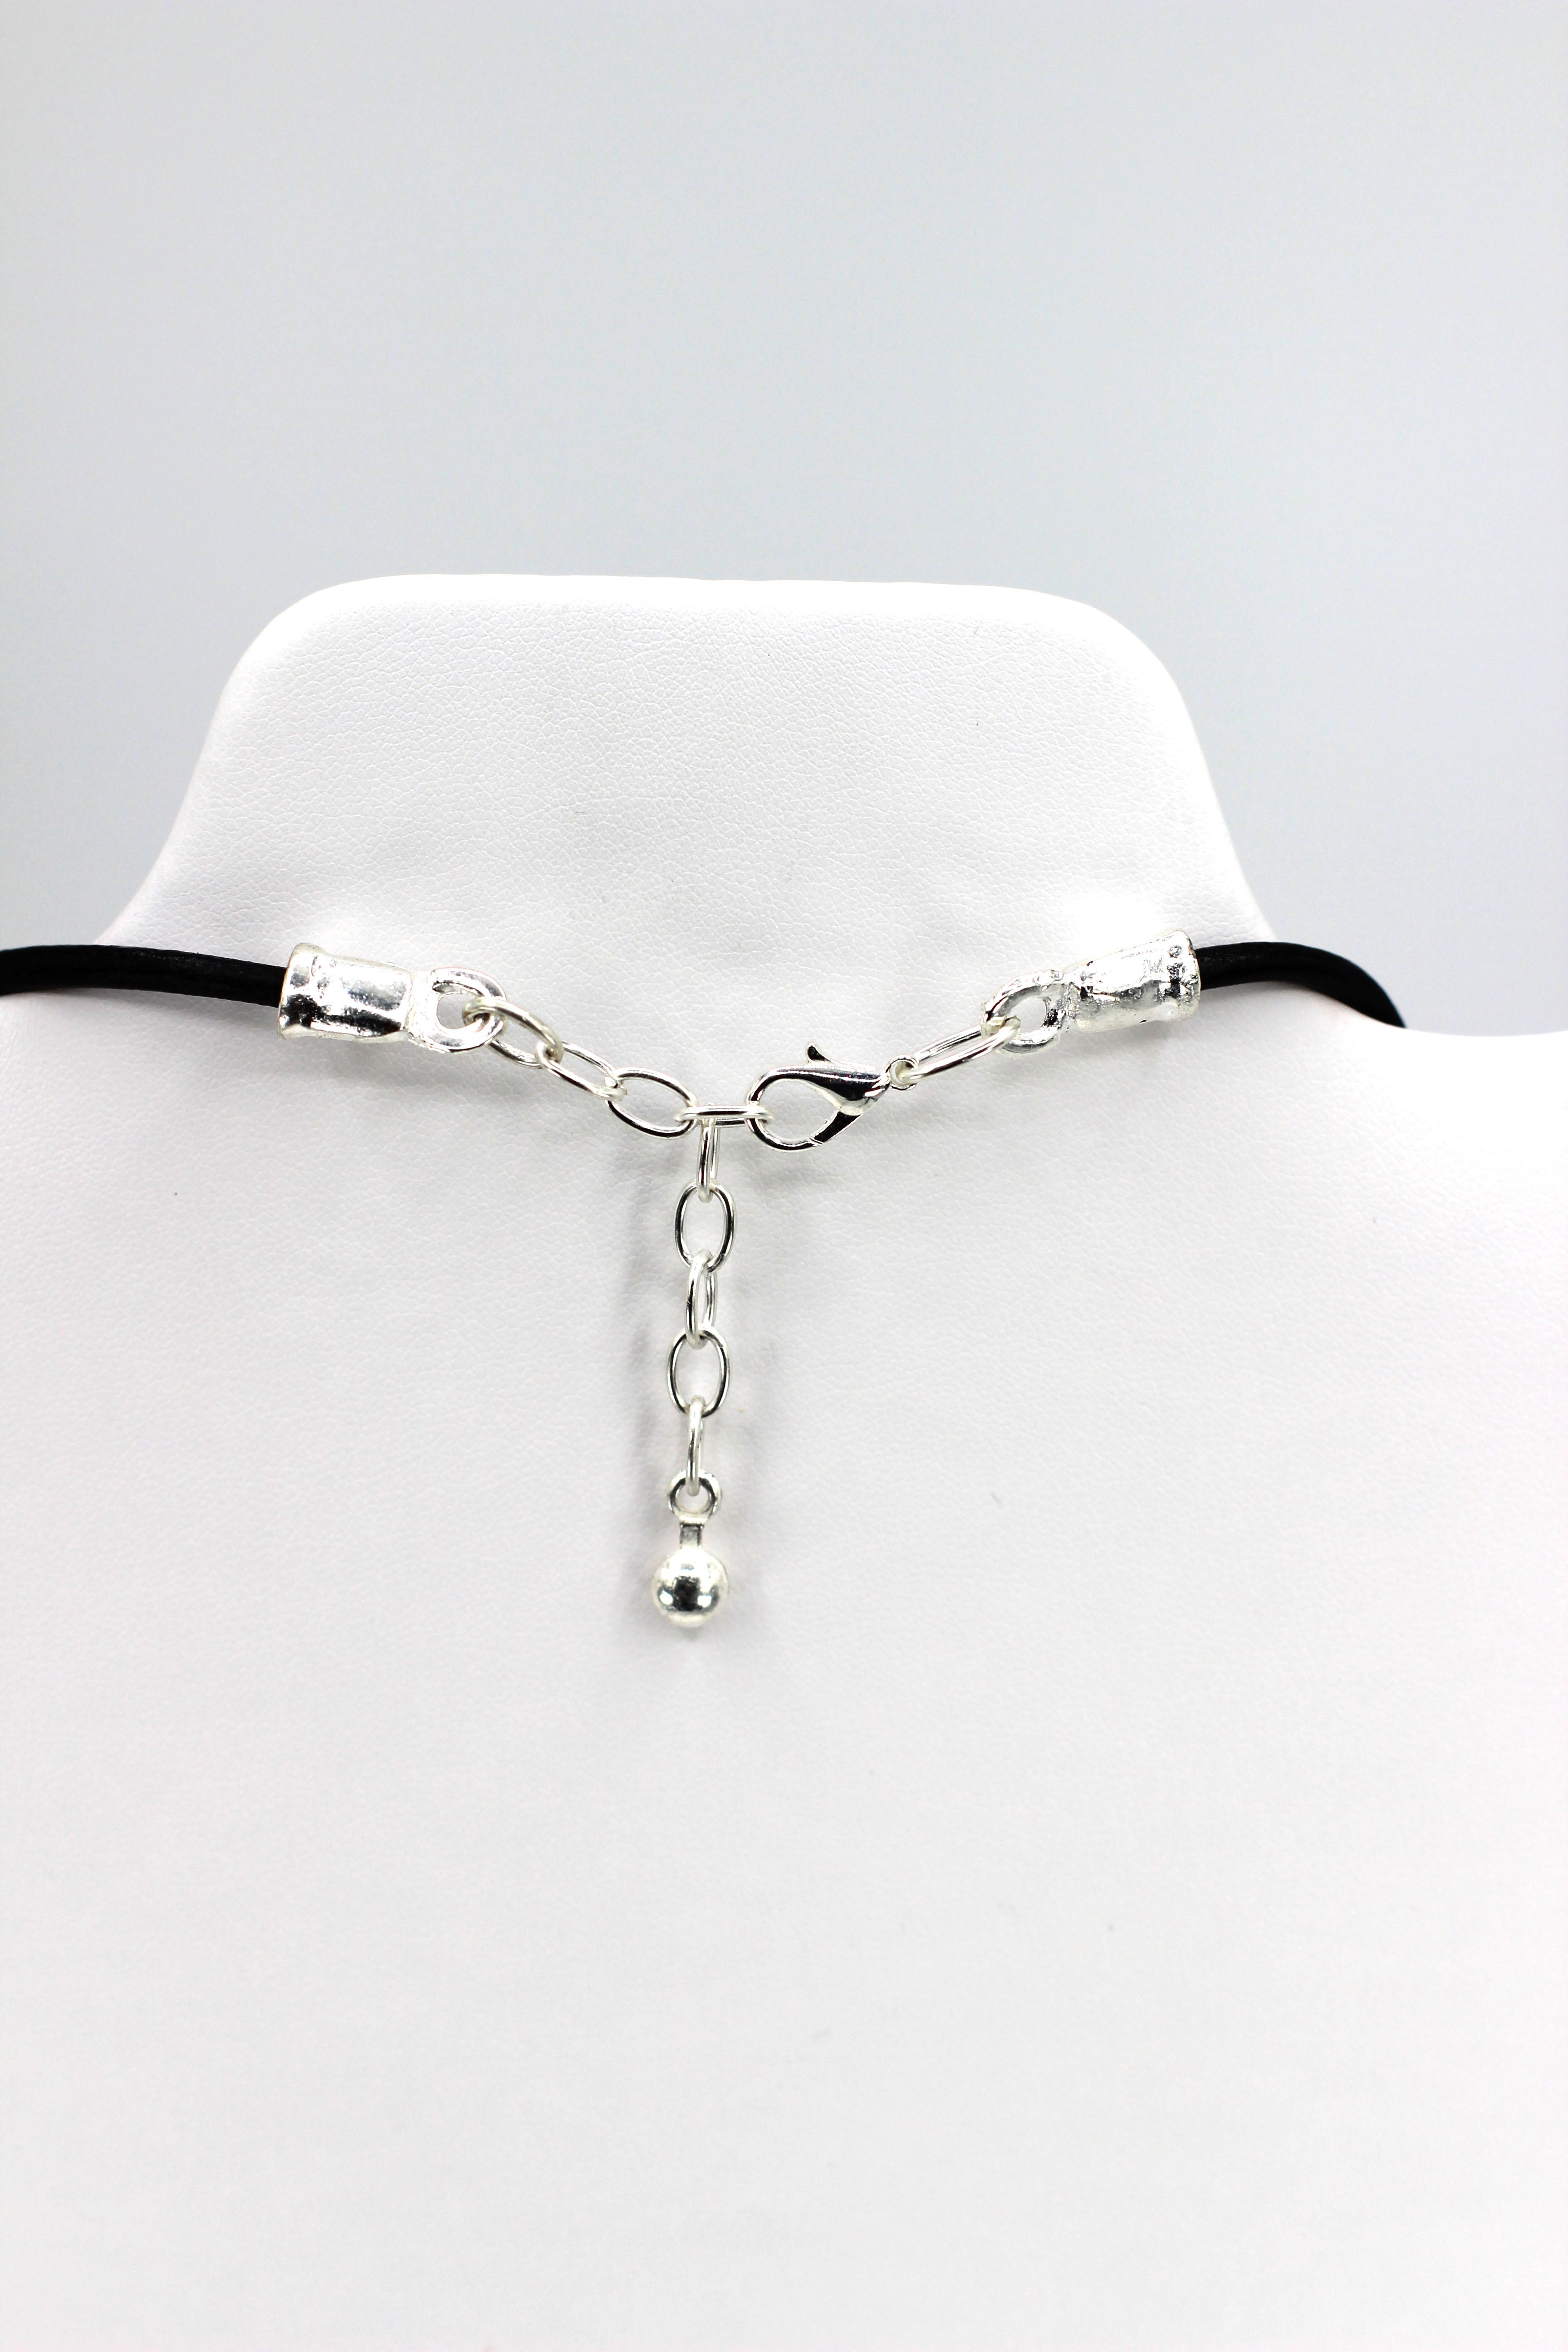 Holy Spirit Cross Necklace Handmade Jewelry with Genuine Leather Strap by Graciela's Collection